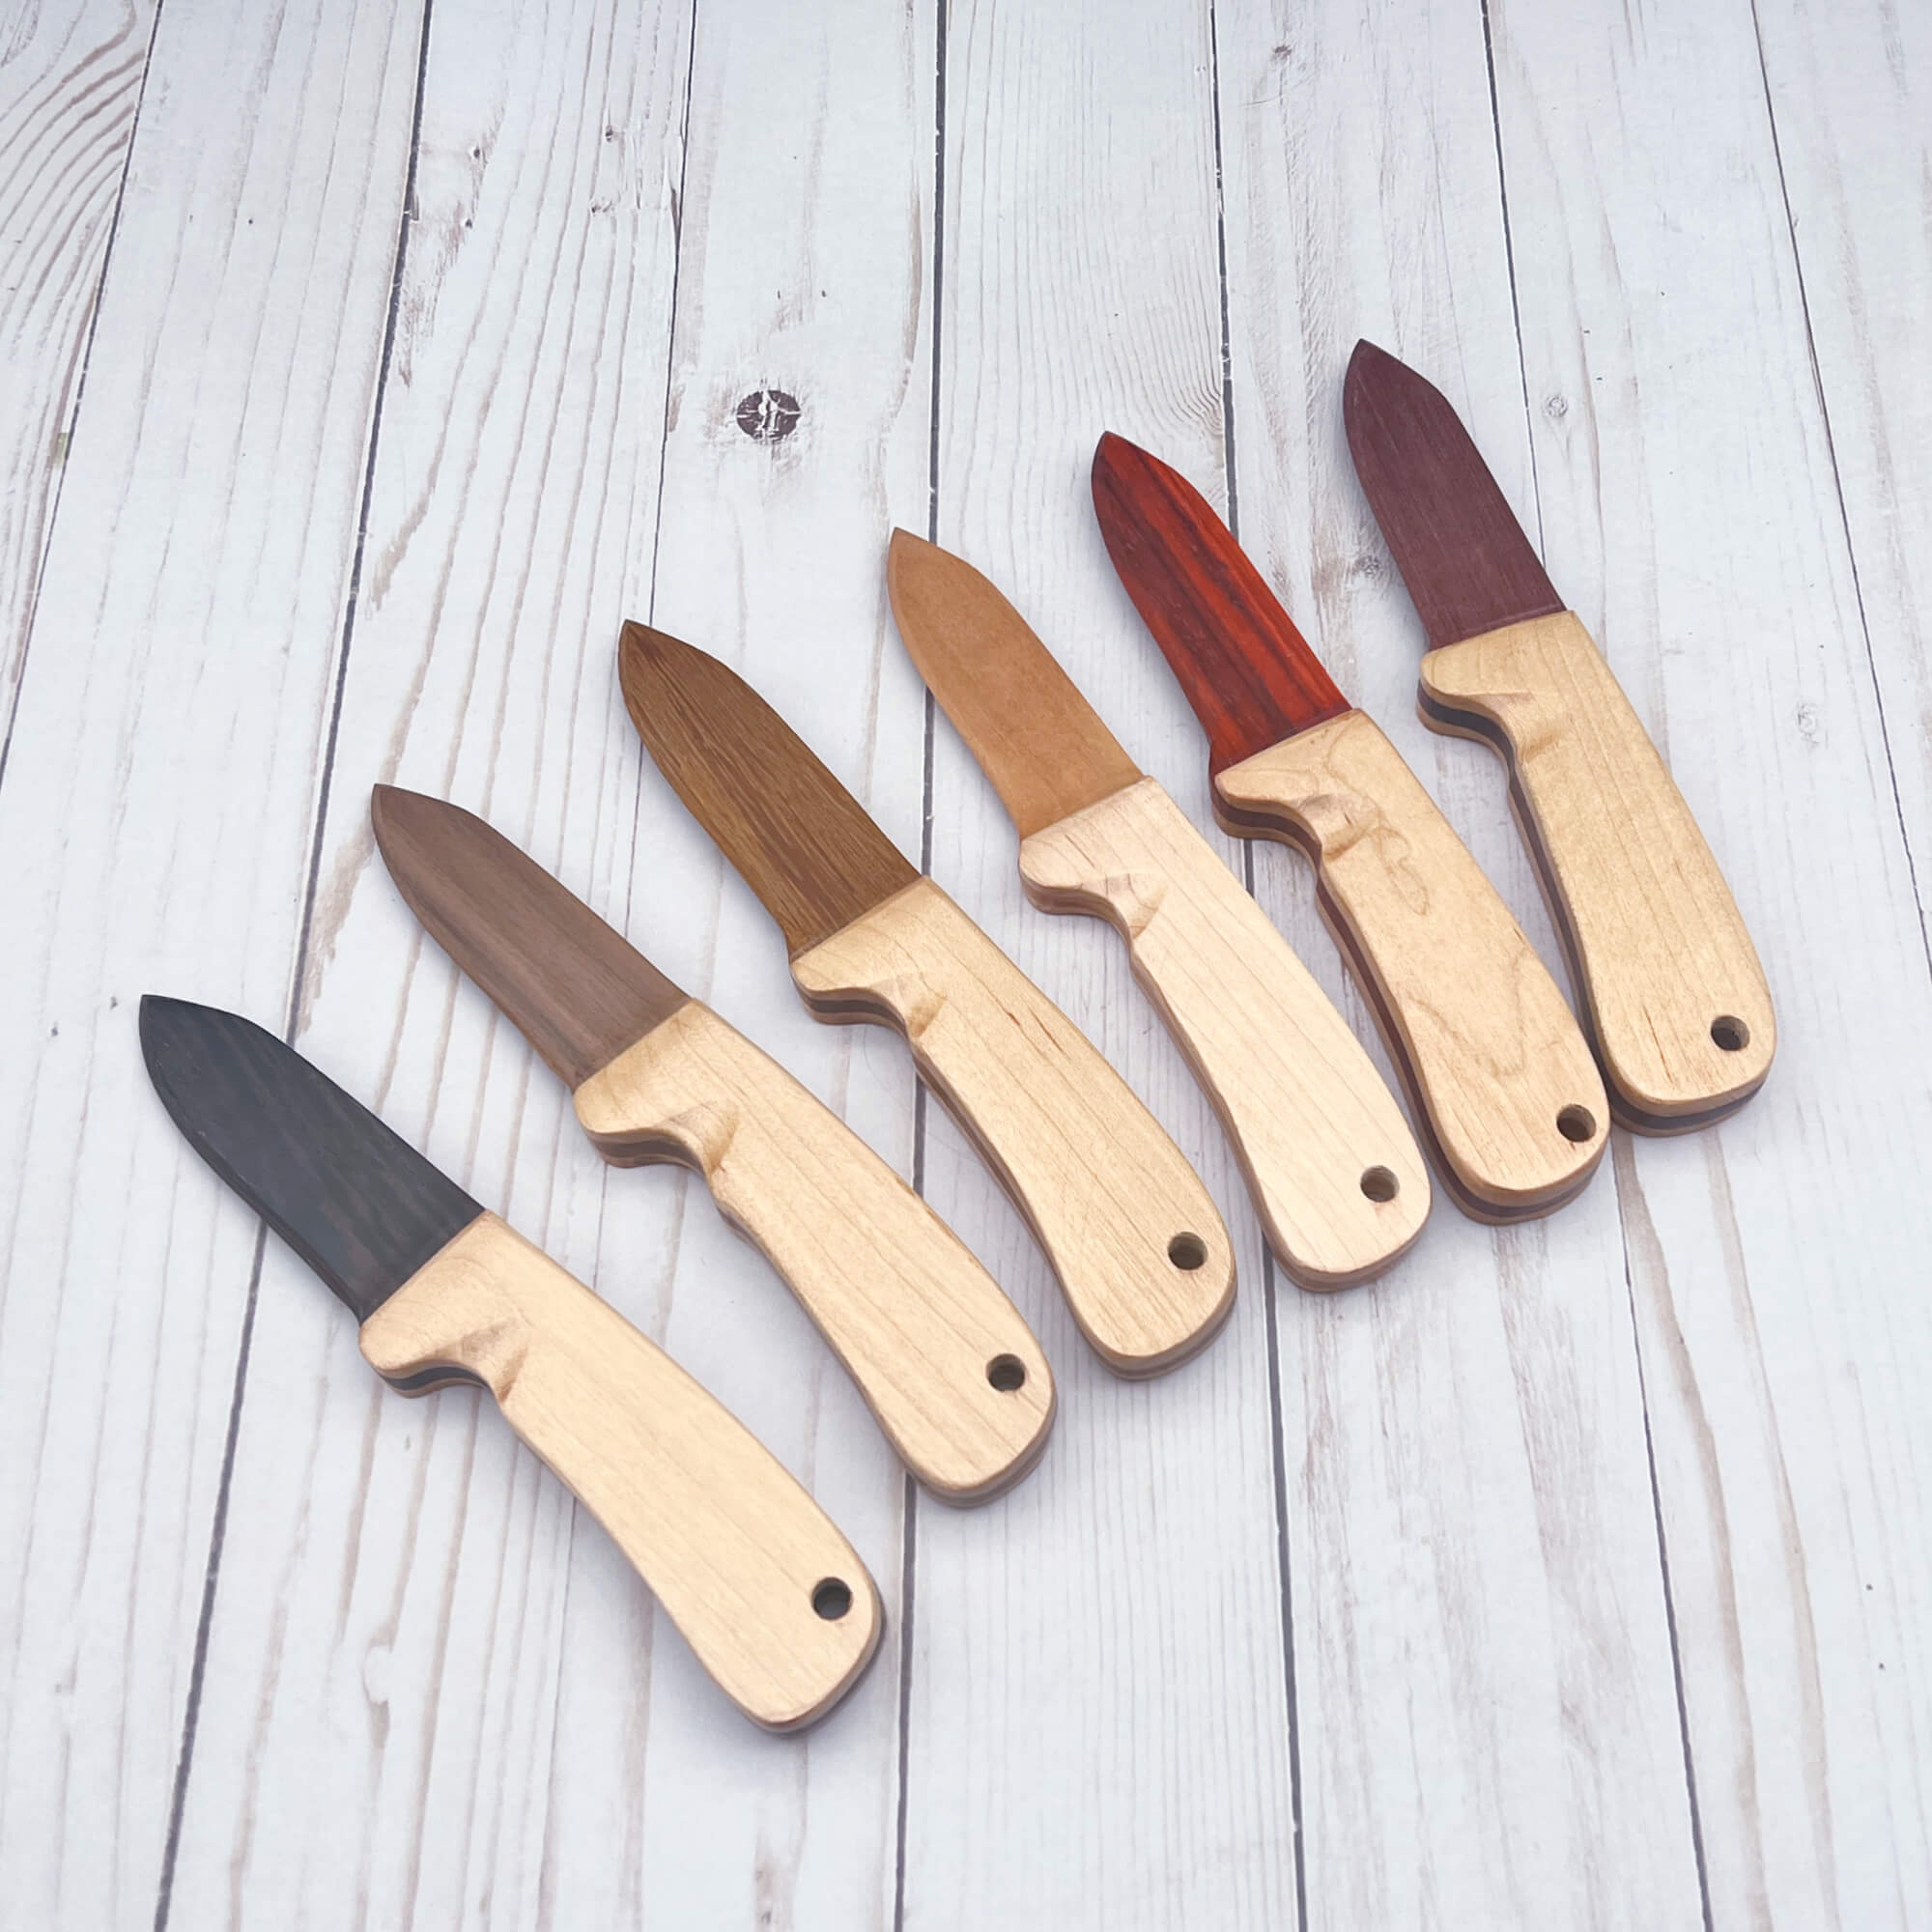 Wooden Wax Play Knives